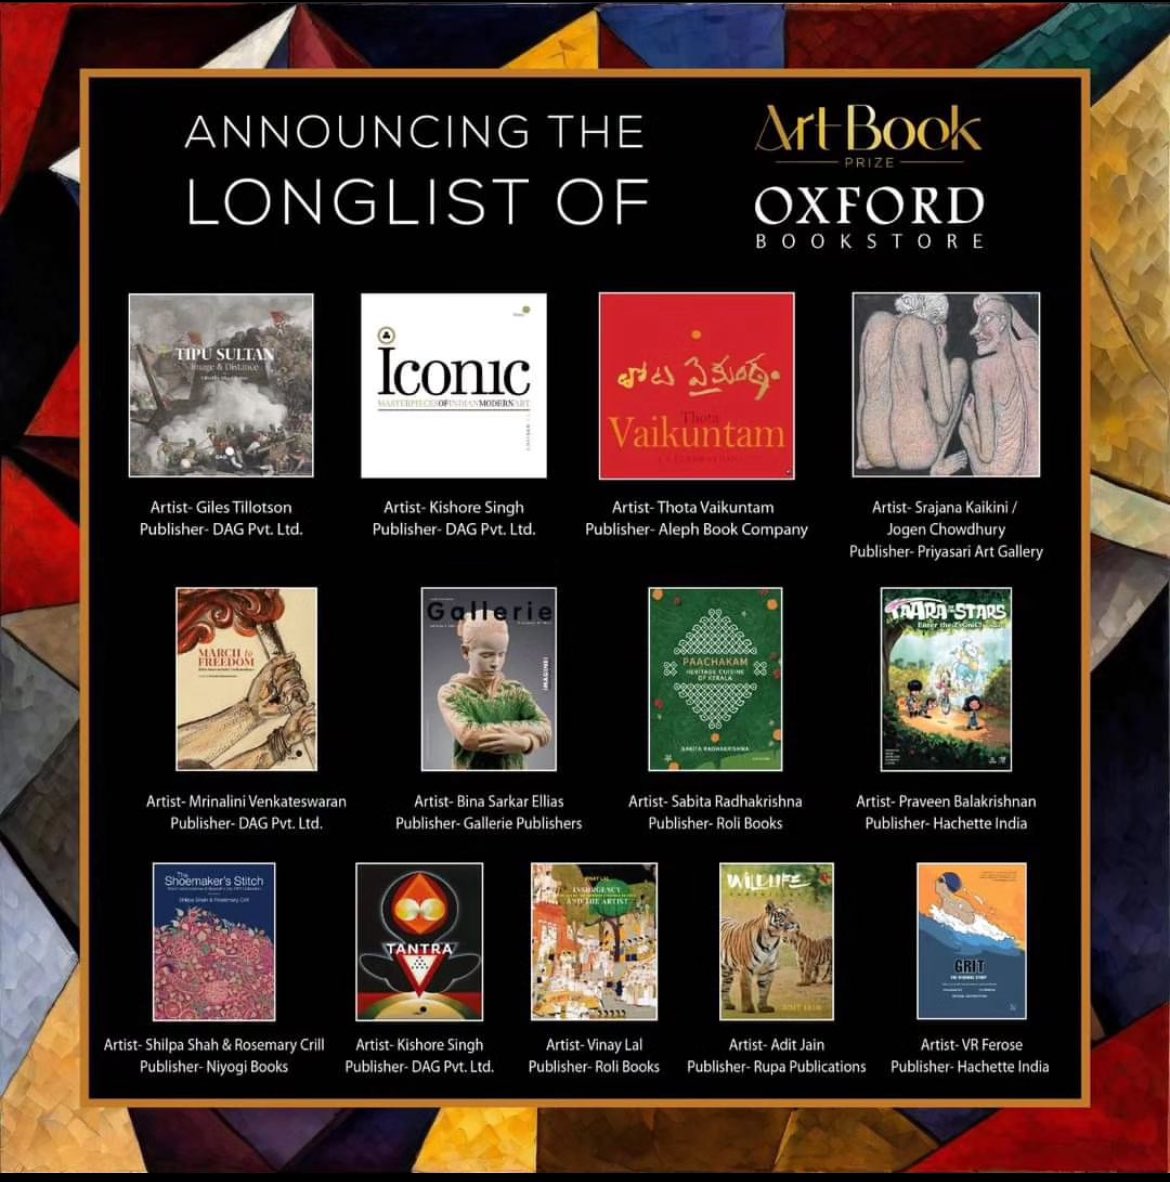 #ThotaVaikuntam makes it to the Longlist of the second edition of Oxford Bookstore Art Book Prize. 
@oxfordbookstore 
Keeping our fingers crossed😁🤞🏻